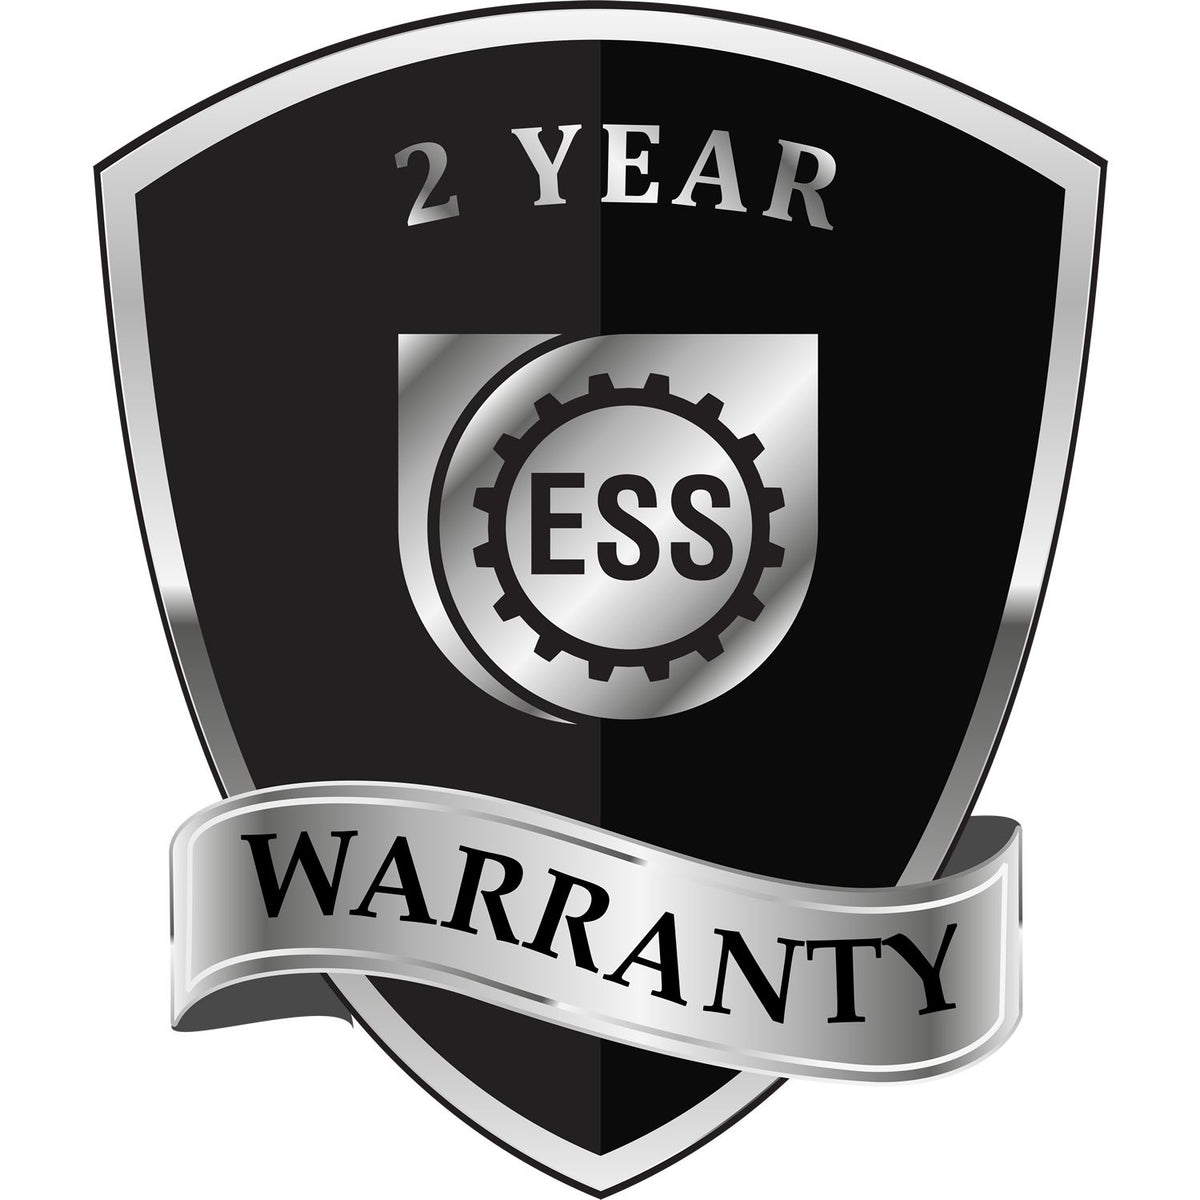 A badge or emblem showing a warranty icon for the Handheld Delaware Professional Engineer Embosser